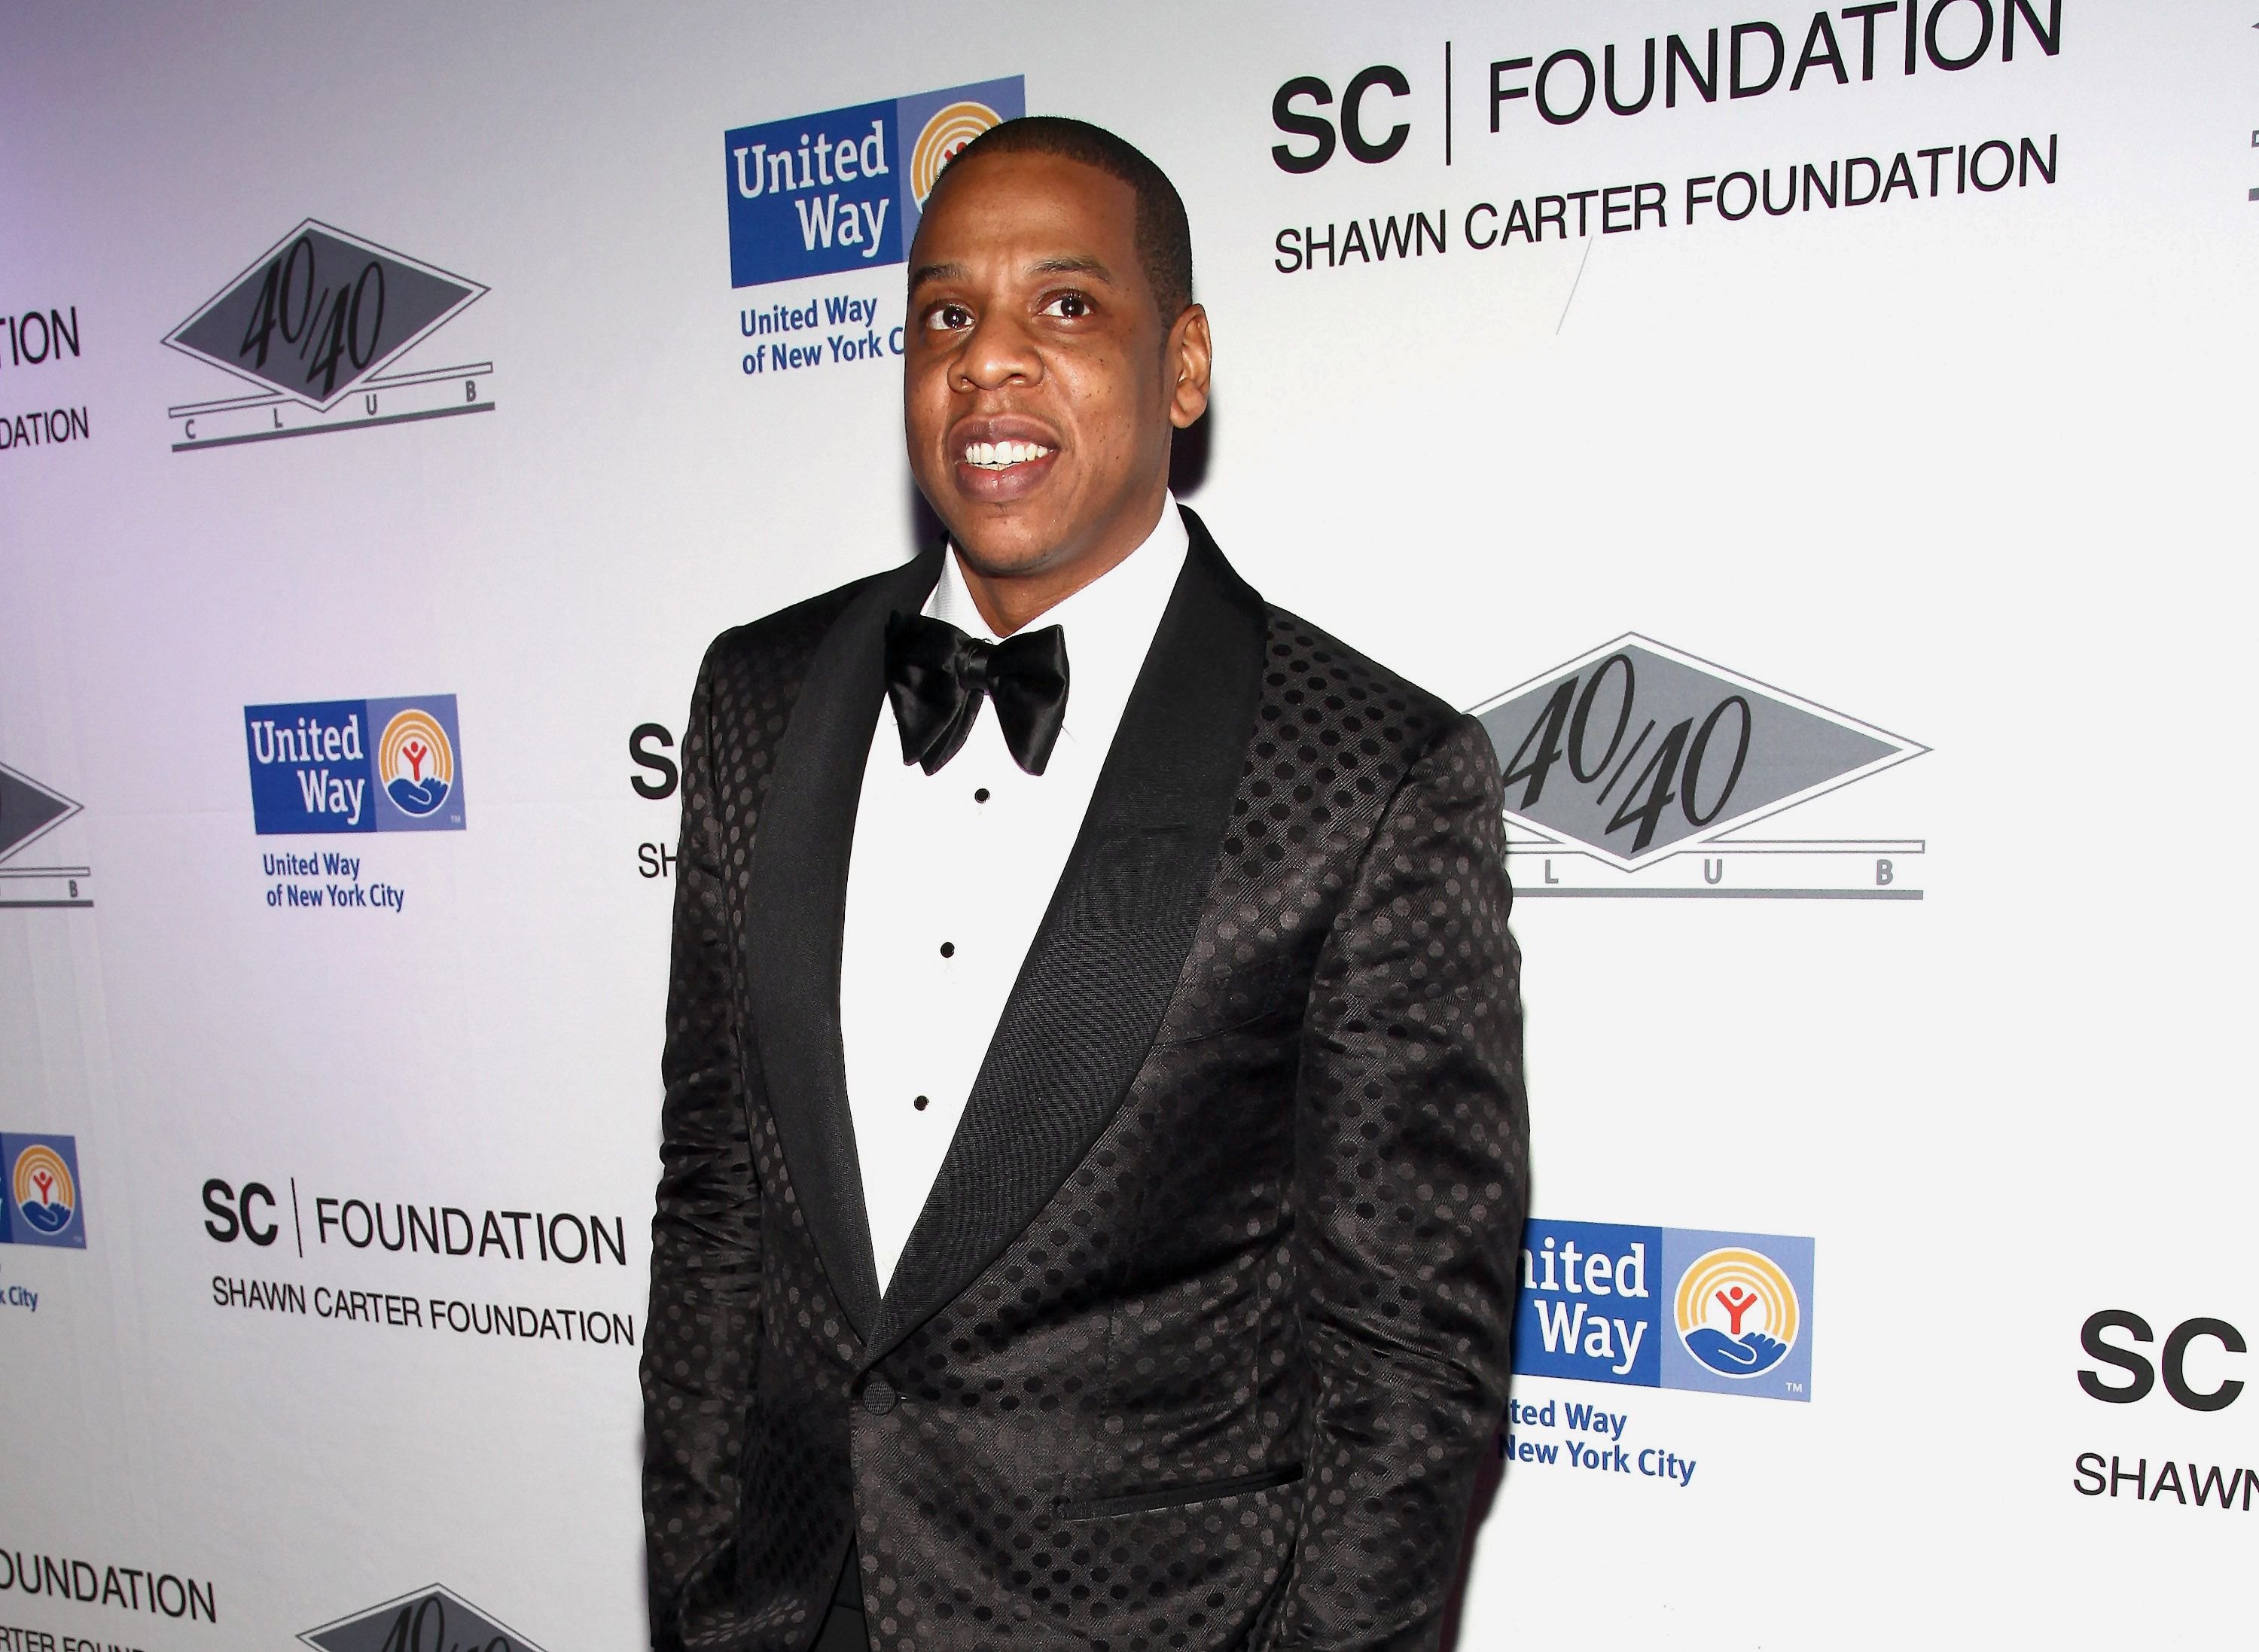 Jay-Z attends the after party following his concert at Carnegie Hall to benefit The United Way Of New York City and the Shawn Carter Foundation at the 40 / 40 Club on February 6, 2012 in New York City. | Source: Getty Images